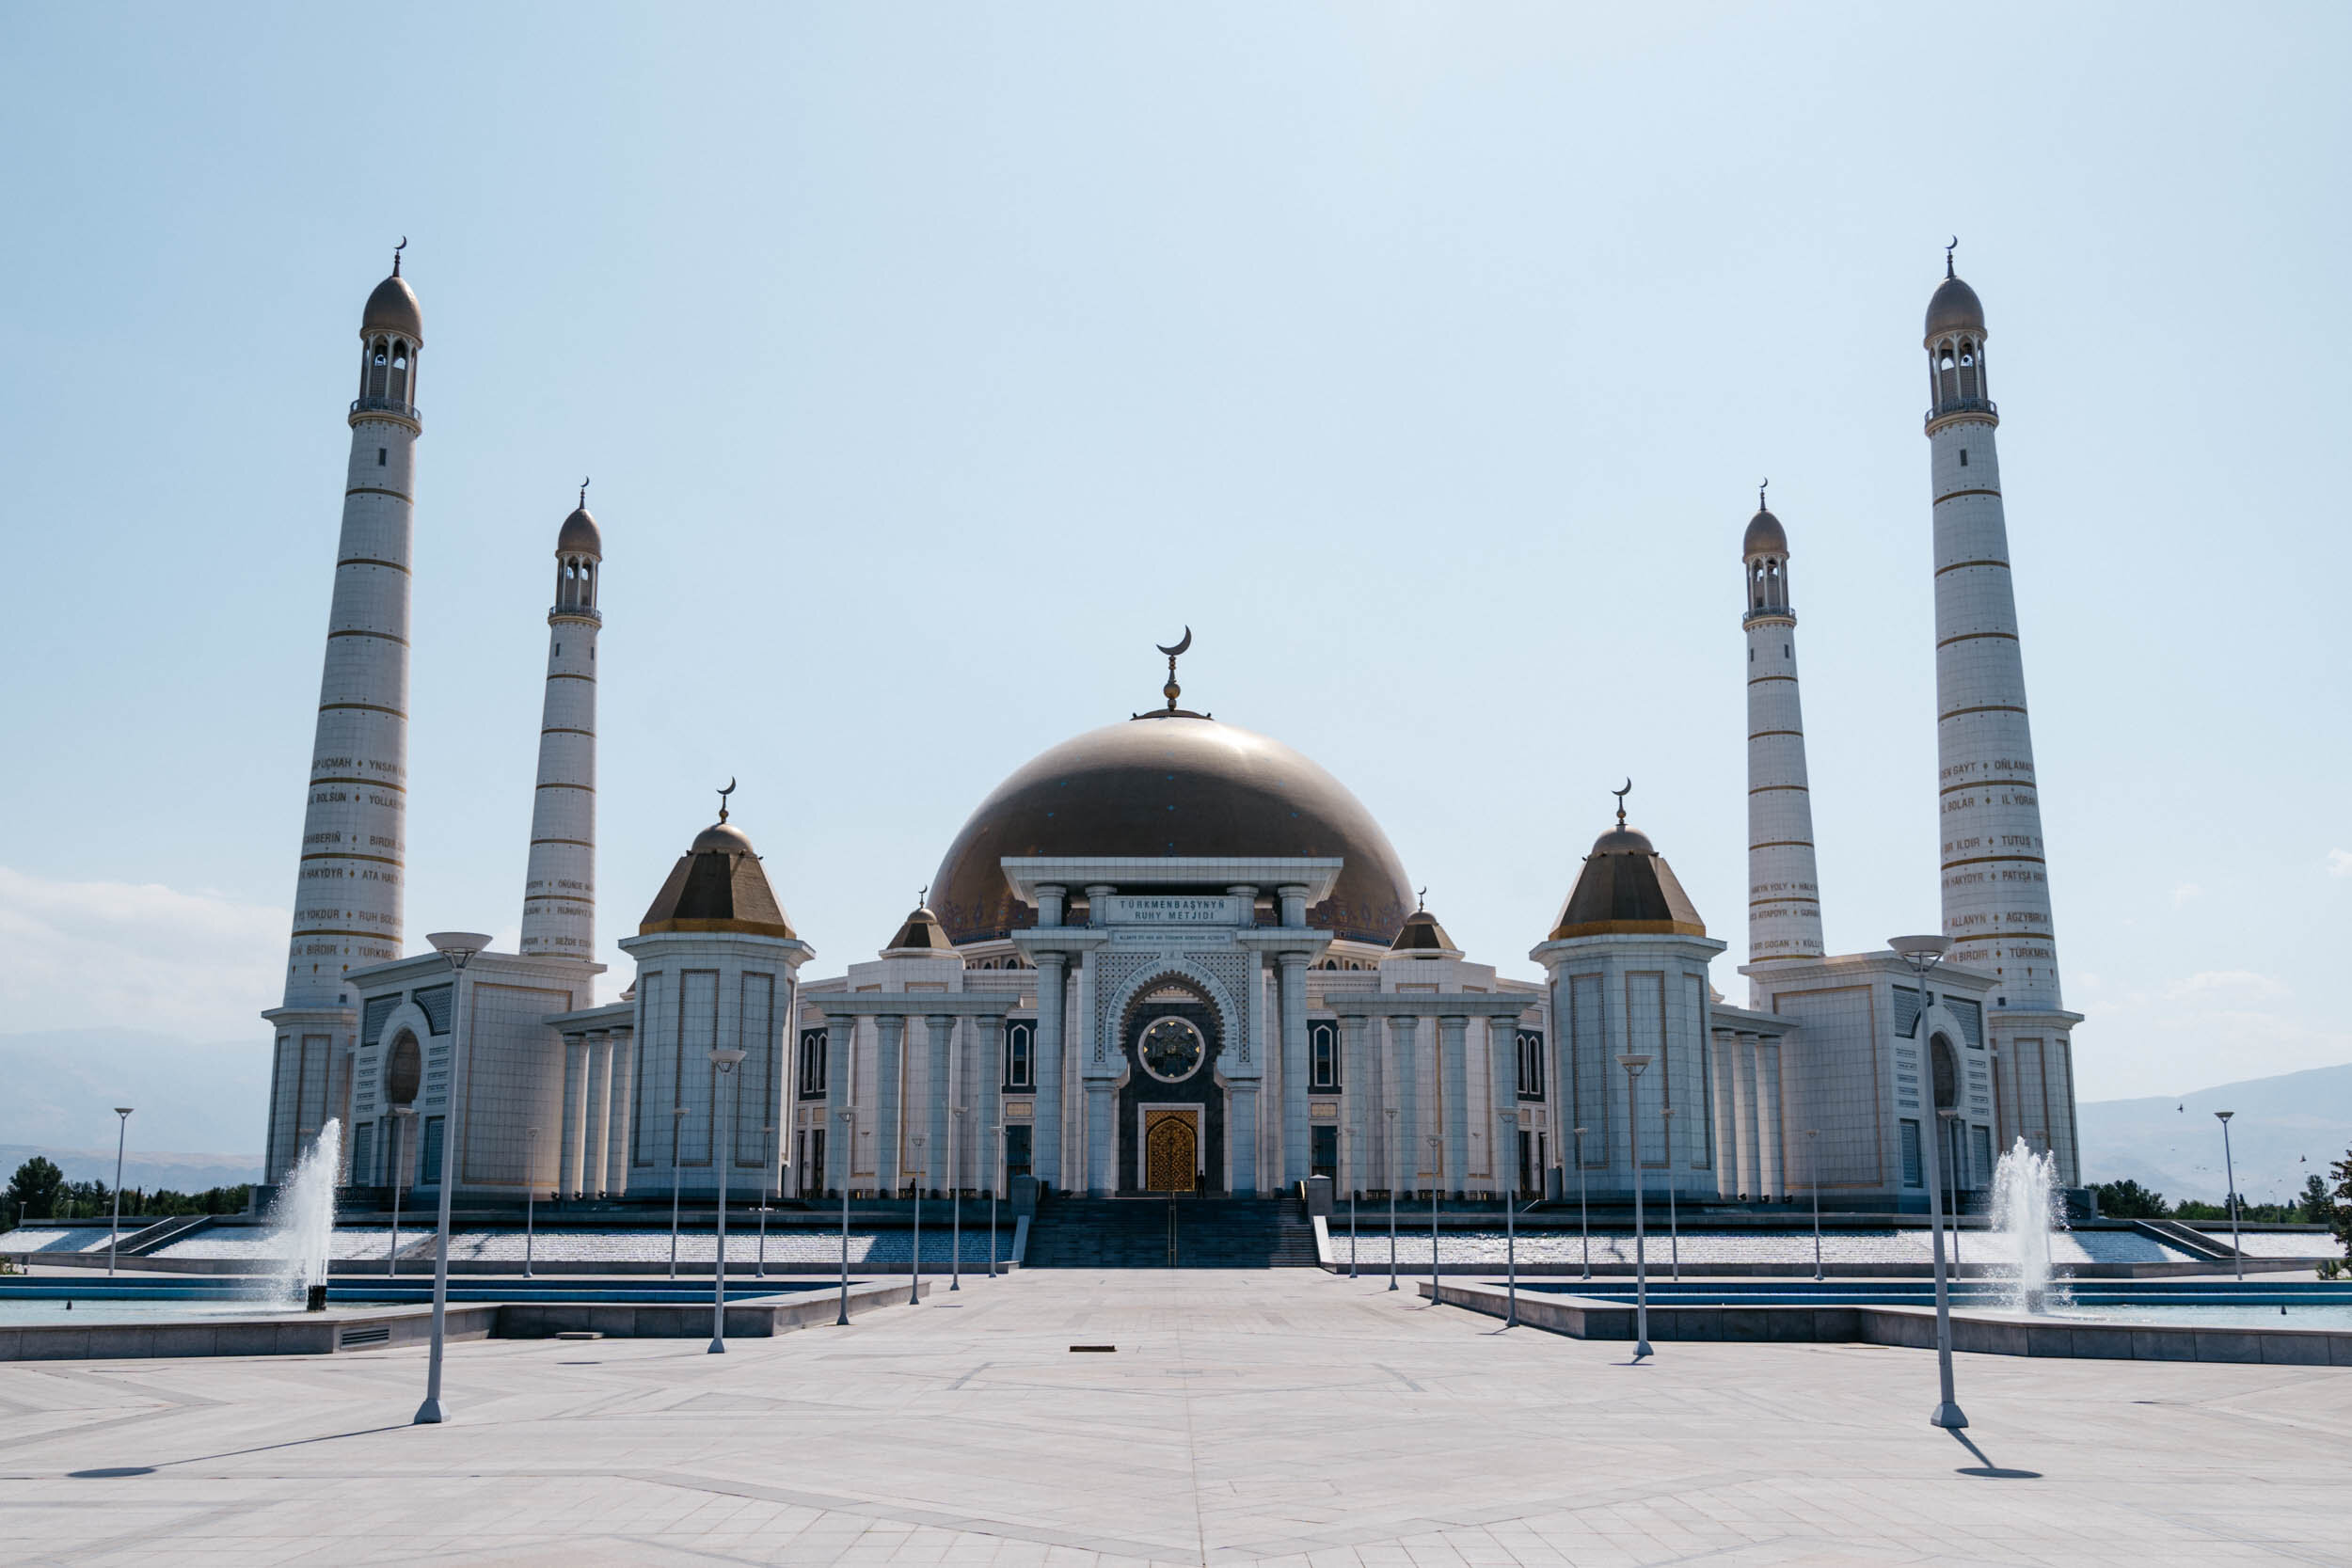  Kipchak Mosque; the largest mosque in Central Asia. 10,000 worshipers can attend services inside the mosque, but most of the time it is empty. 